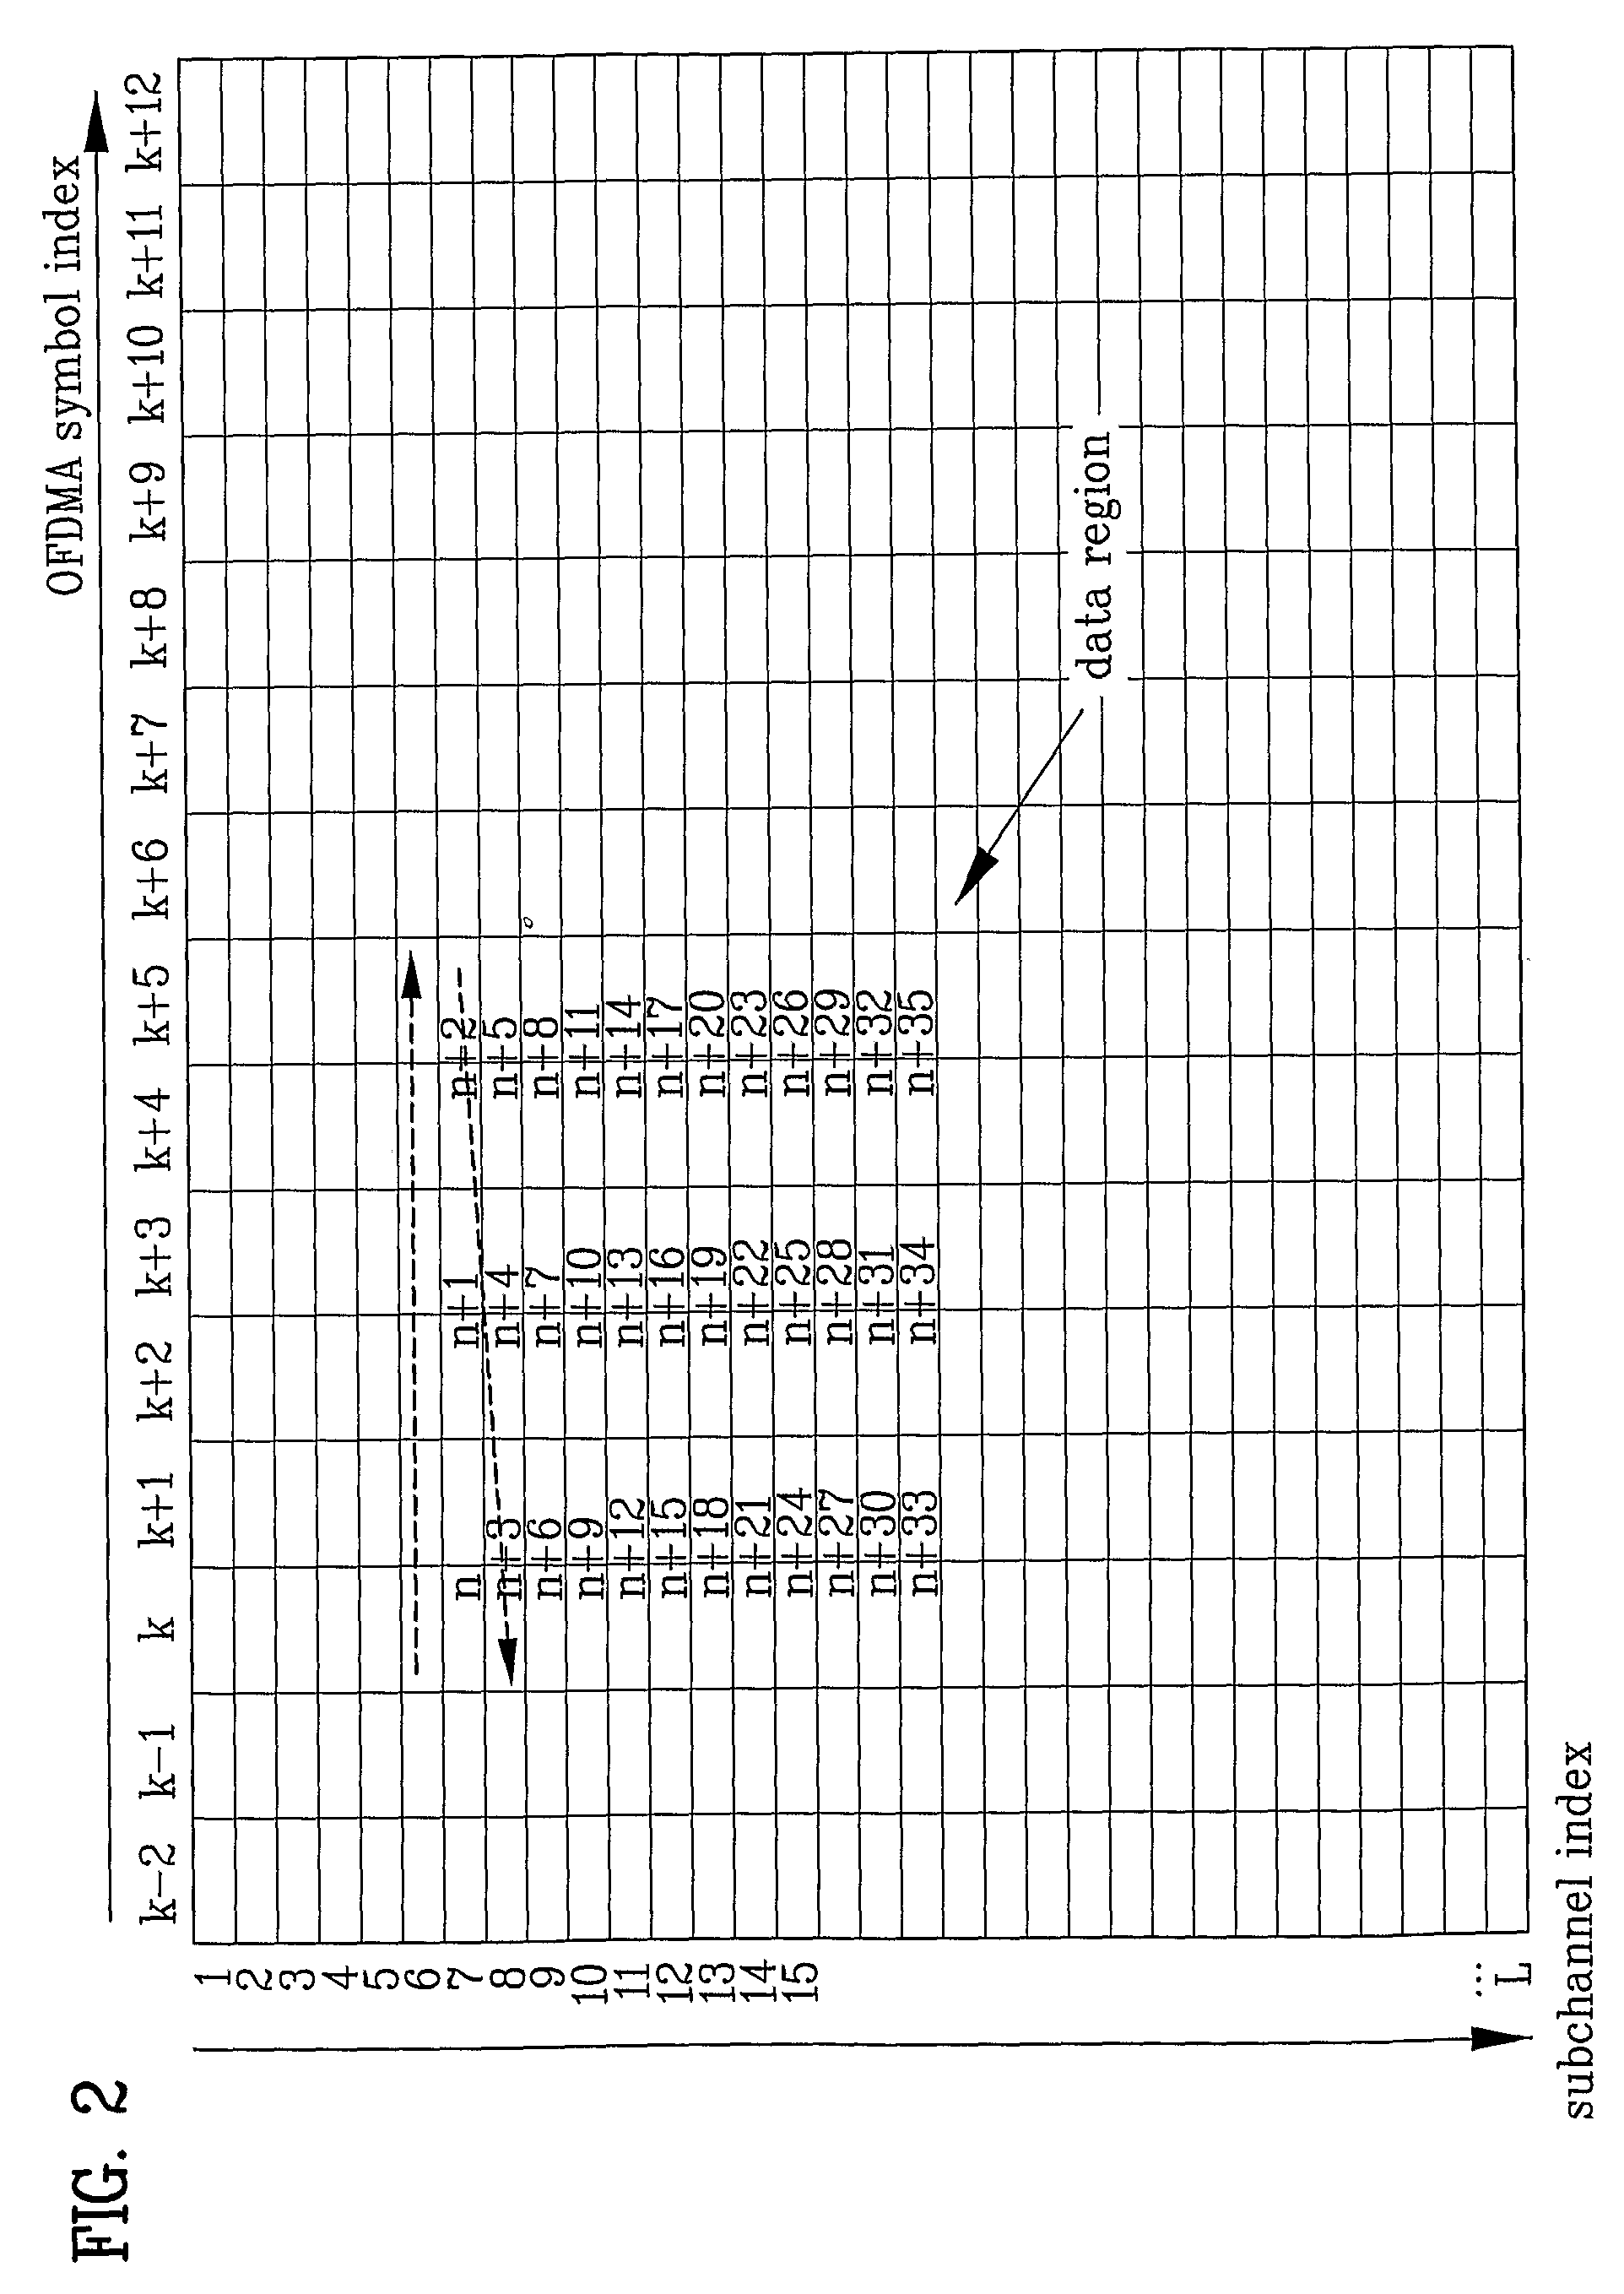 Method of controlling data transmission for multimedia and broadcasting services in a broadband wireless access system